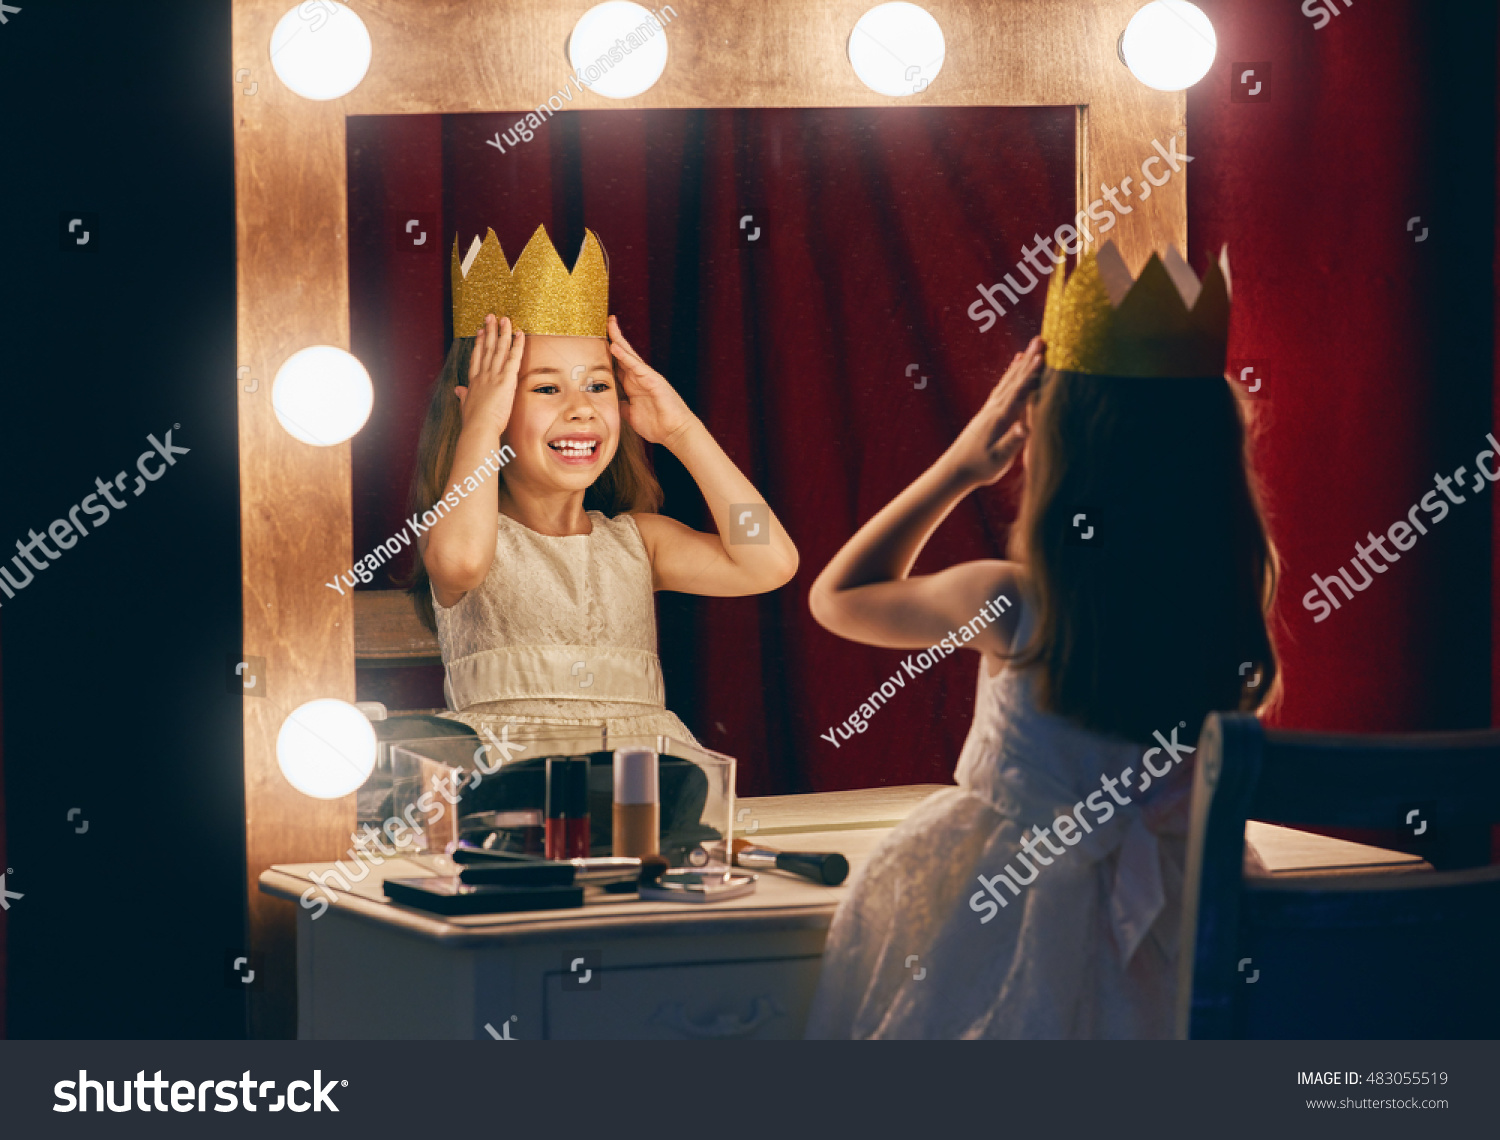 Cute little actress. Child girl in Princess costume on the background of theatrical scenes and mirrors. #483055519